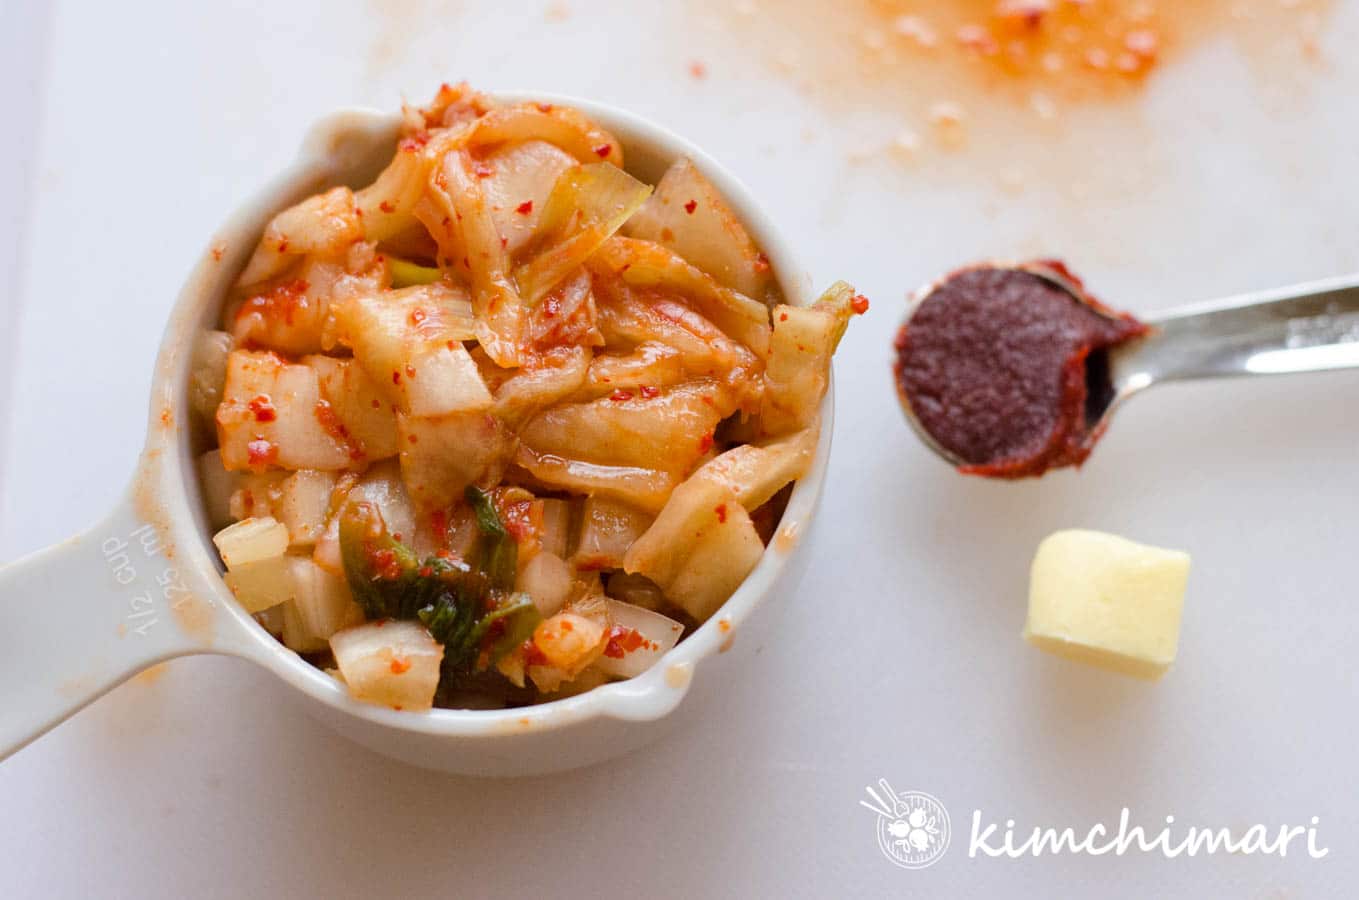 chopped kimchi, gochujang and butter measured in cup and spoons